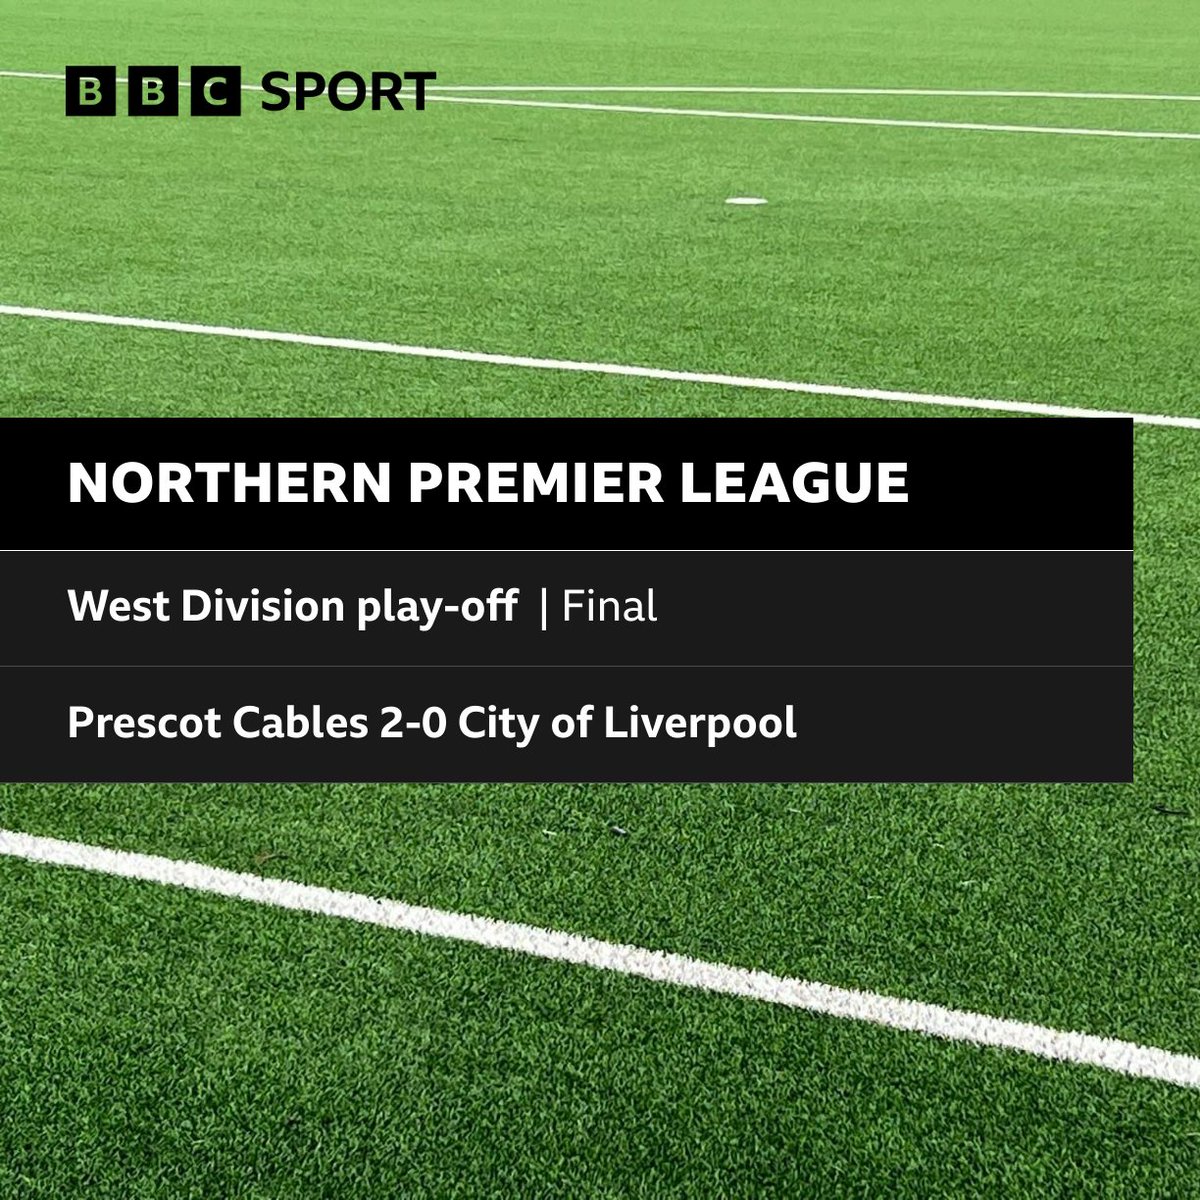 ⏹️ @NorthernPremLge full-time

🏆 @PrescotCablesFC are promoted to the Northern Premier League Premier Division

#⃣ #TotalSport